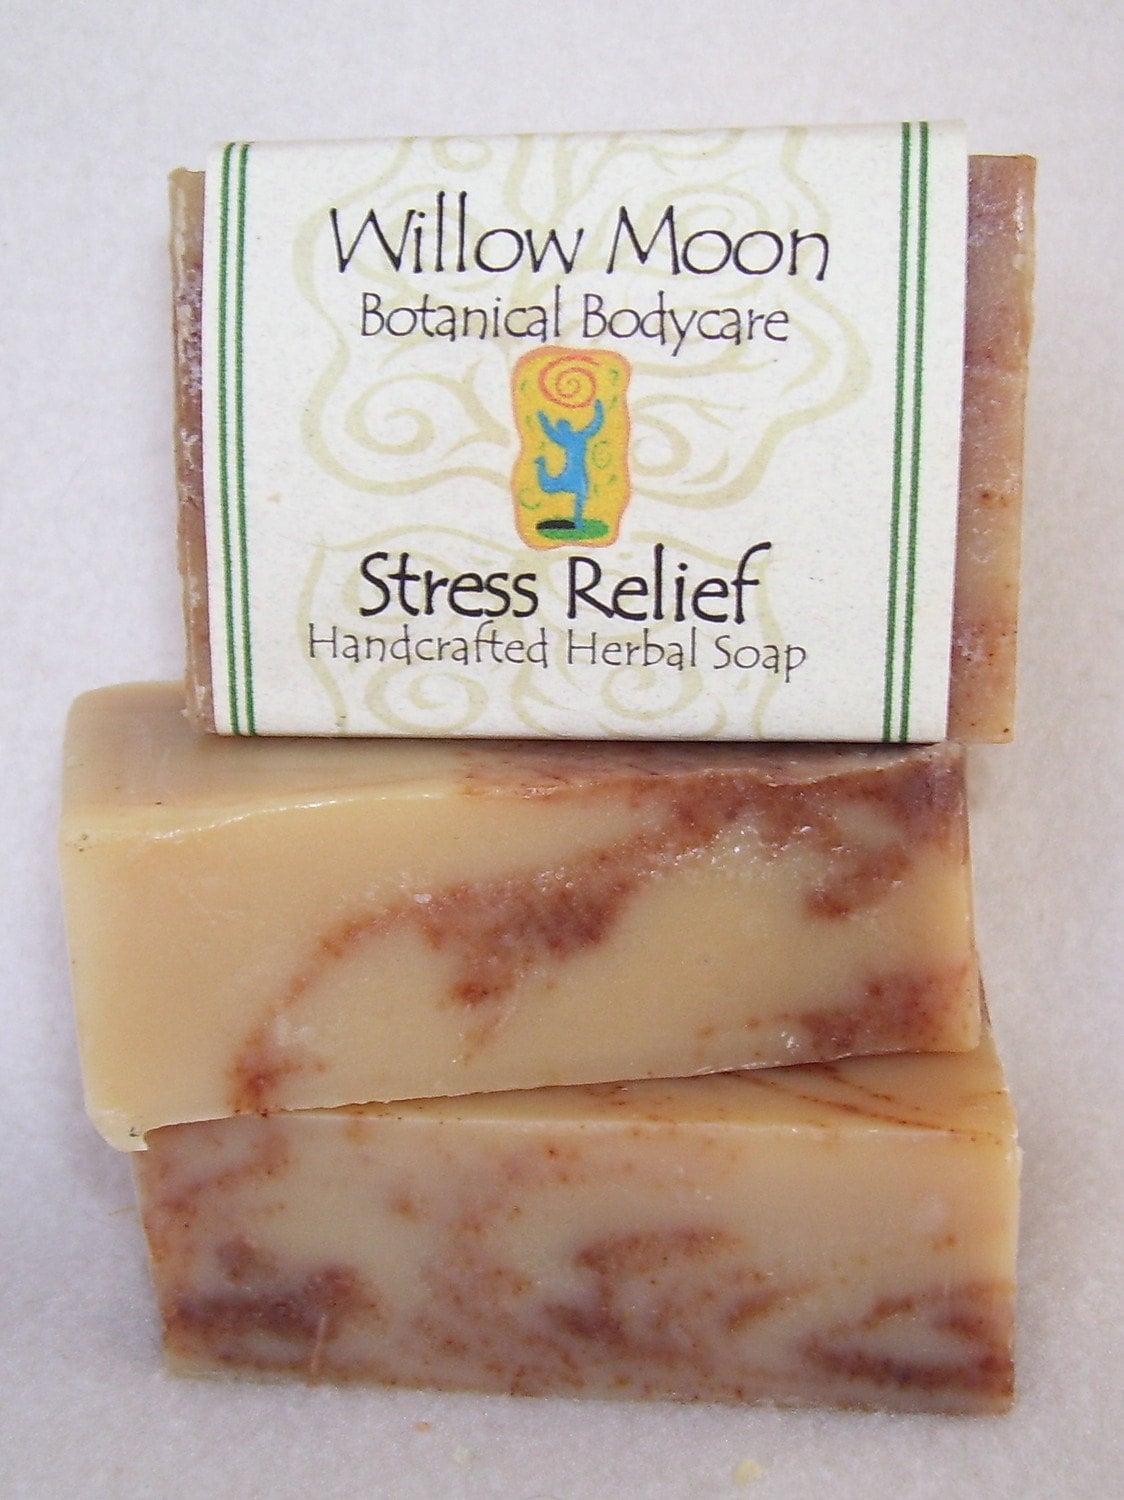 Handcrafted Olive Oil Soap Stress Relief , Shea butter, hemp seed oil, moisturizing, natural